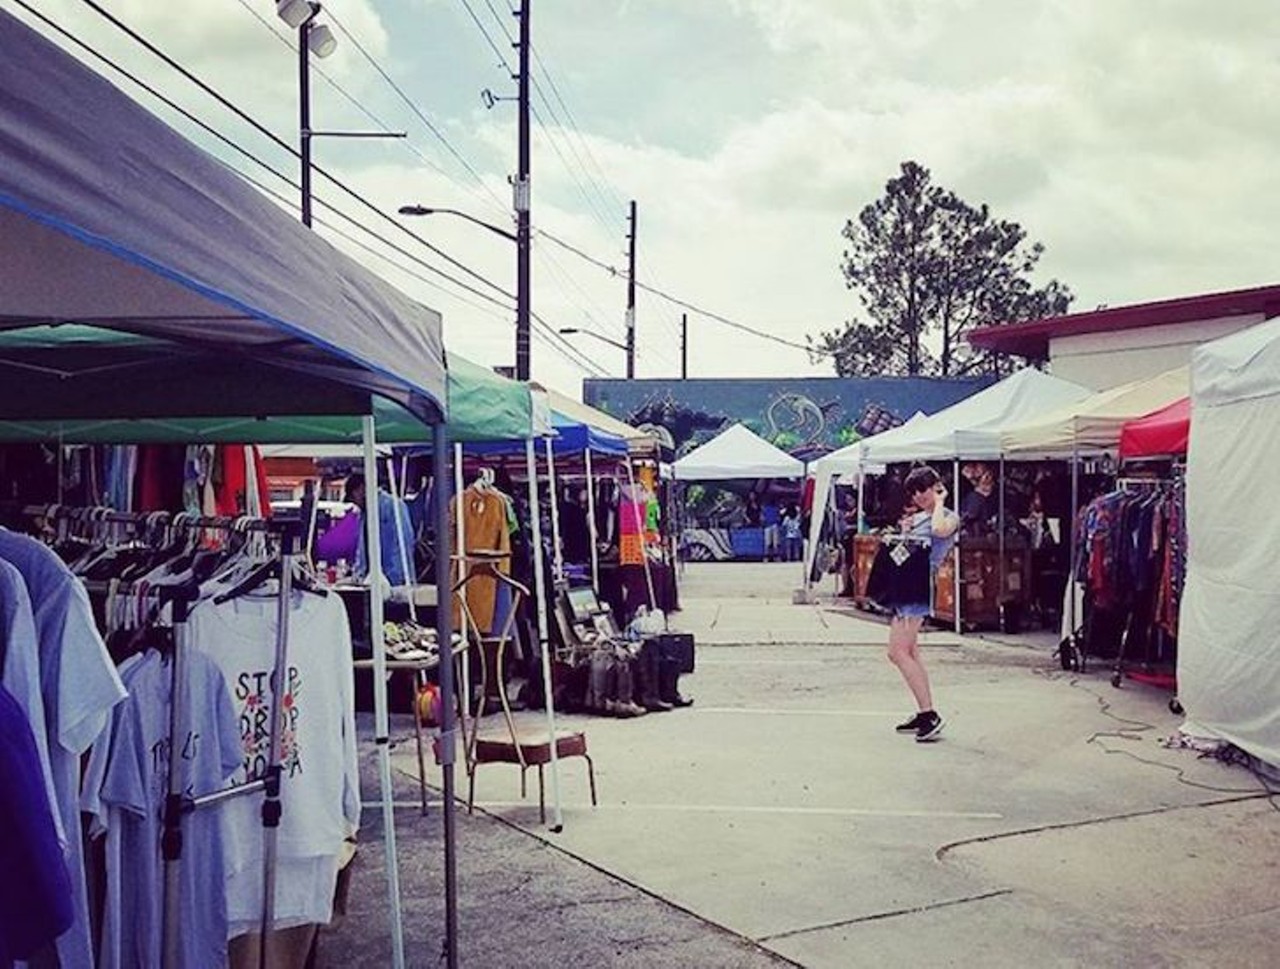 Sunday, Dec. 10
Will's A Faire Holiday Market Market with handmade gifts, live music, food and more. 1 pm; Will's Pub, 1042 N. Mills Ave.; free; willspub.org.
Photo via jessicapawli/Instagram